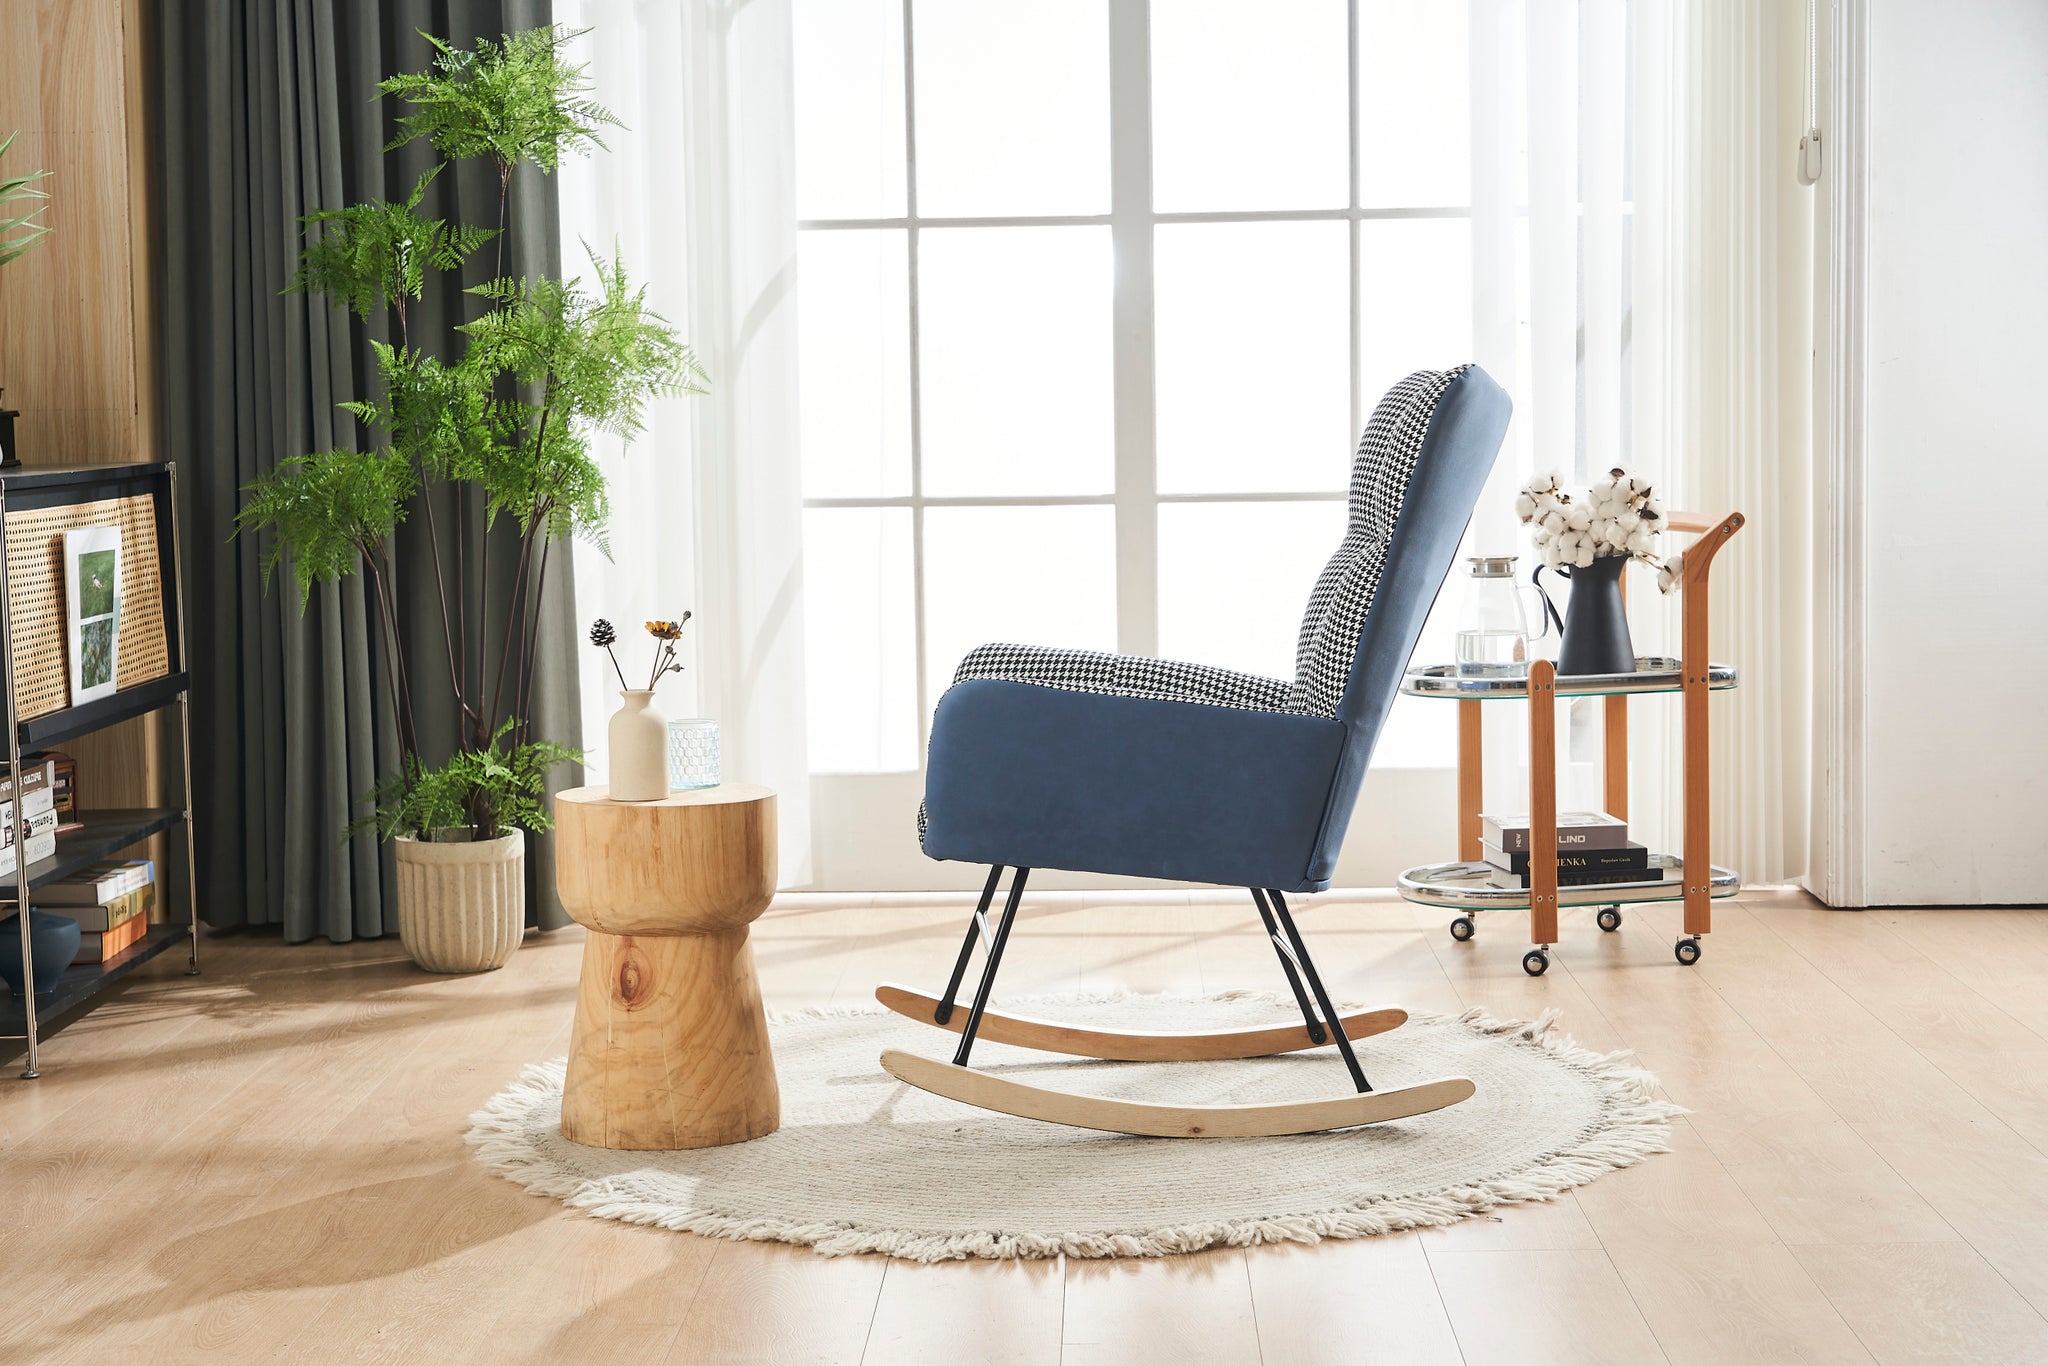 Rocking Chair Nursery, Solid Wood Legs Reading Chair blue-primary living space-modern-rocking